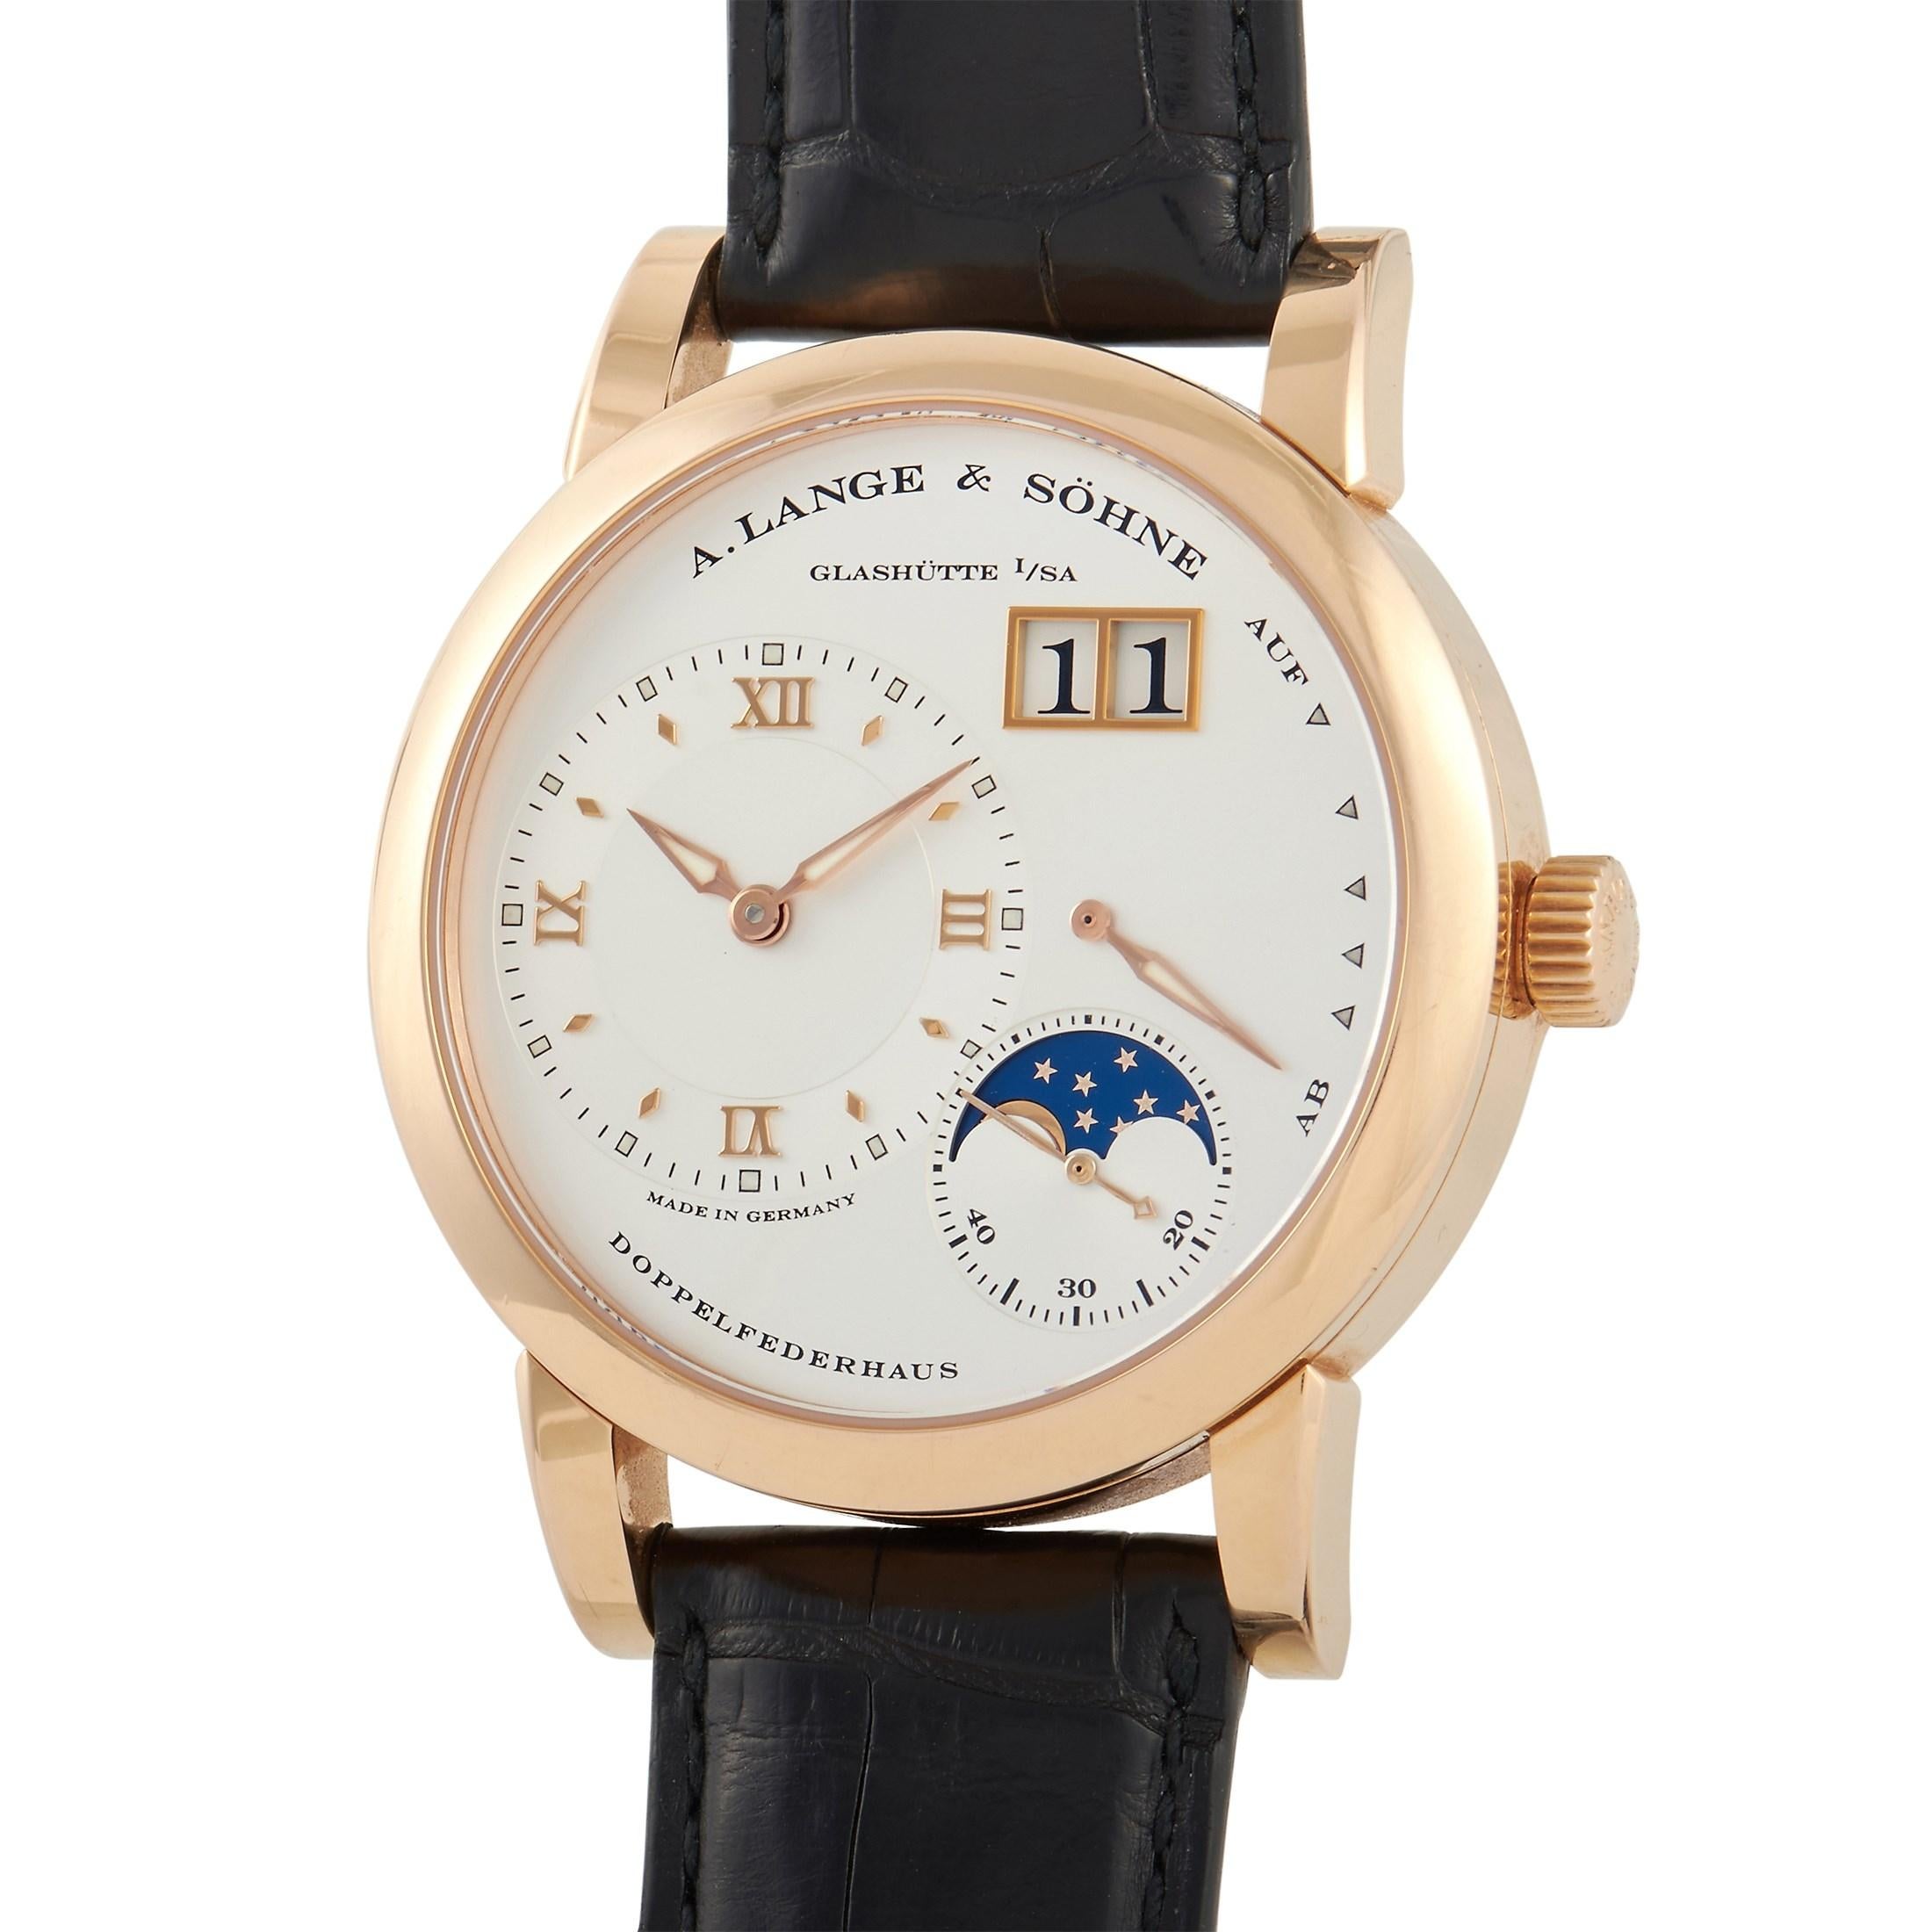 An exceptionally classy timepiece, the Lange 1 Moon Phase Rose Gold Watch 109.032 looks ever so elegant in its minimalist aesthetics. The 18K rose gold three-body case  measures 28.5mm in diameter and 10.3mm in thickness. The transparent case back